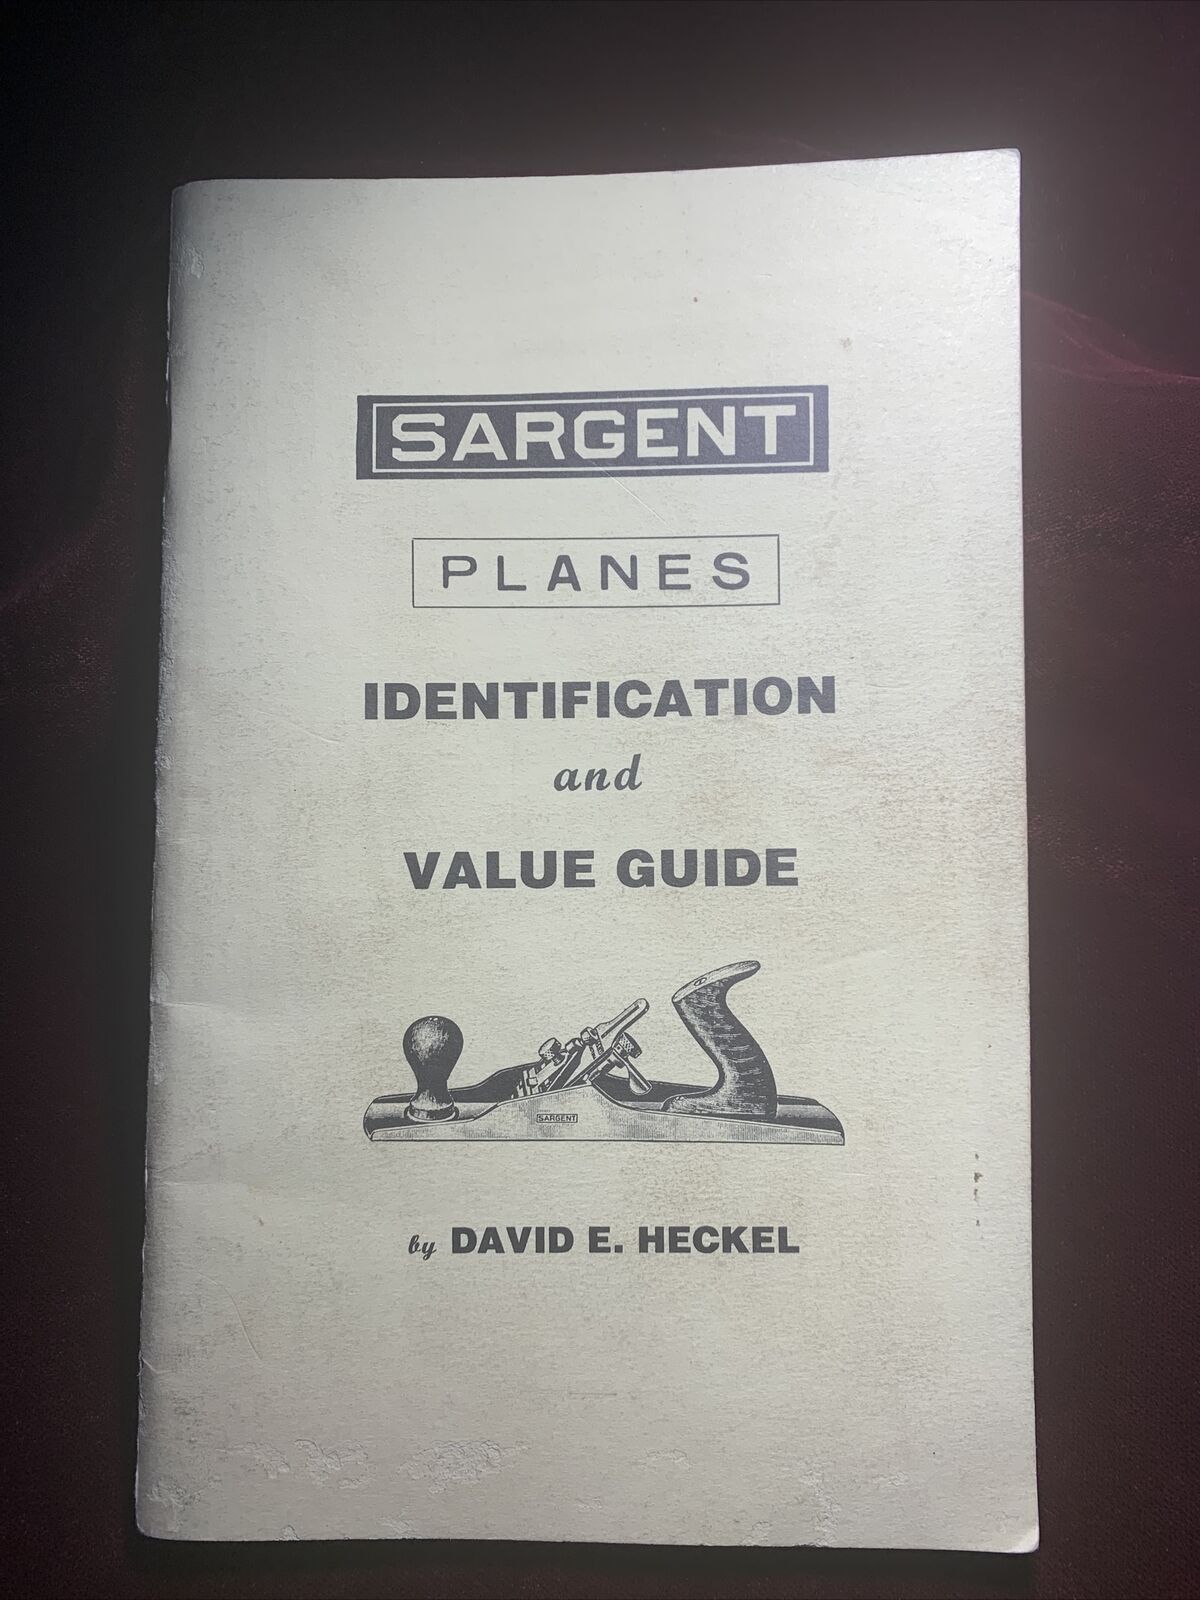 Sargent Planes Identification & Value Guide, David E. Heckel, 1st Ed./2nd Print